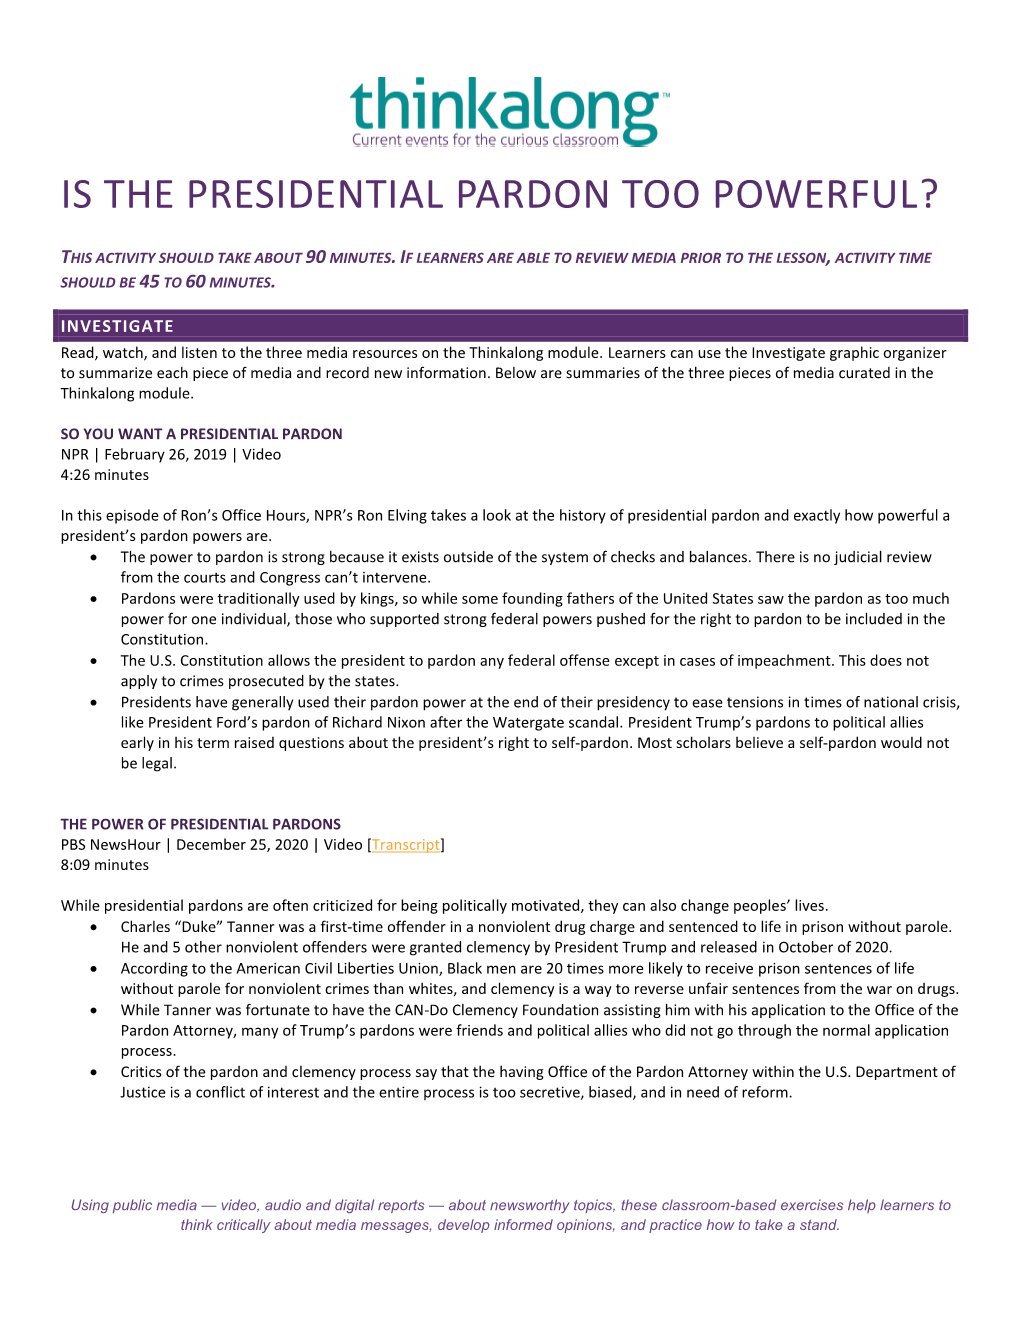 Is the Presidential Pardon Too Powerful?